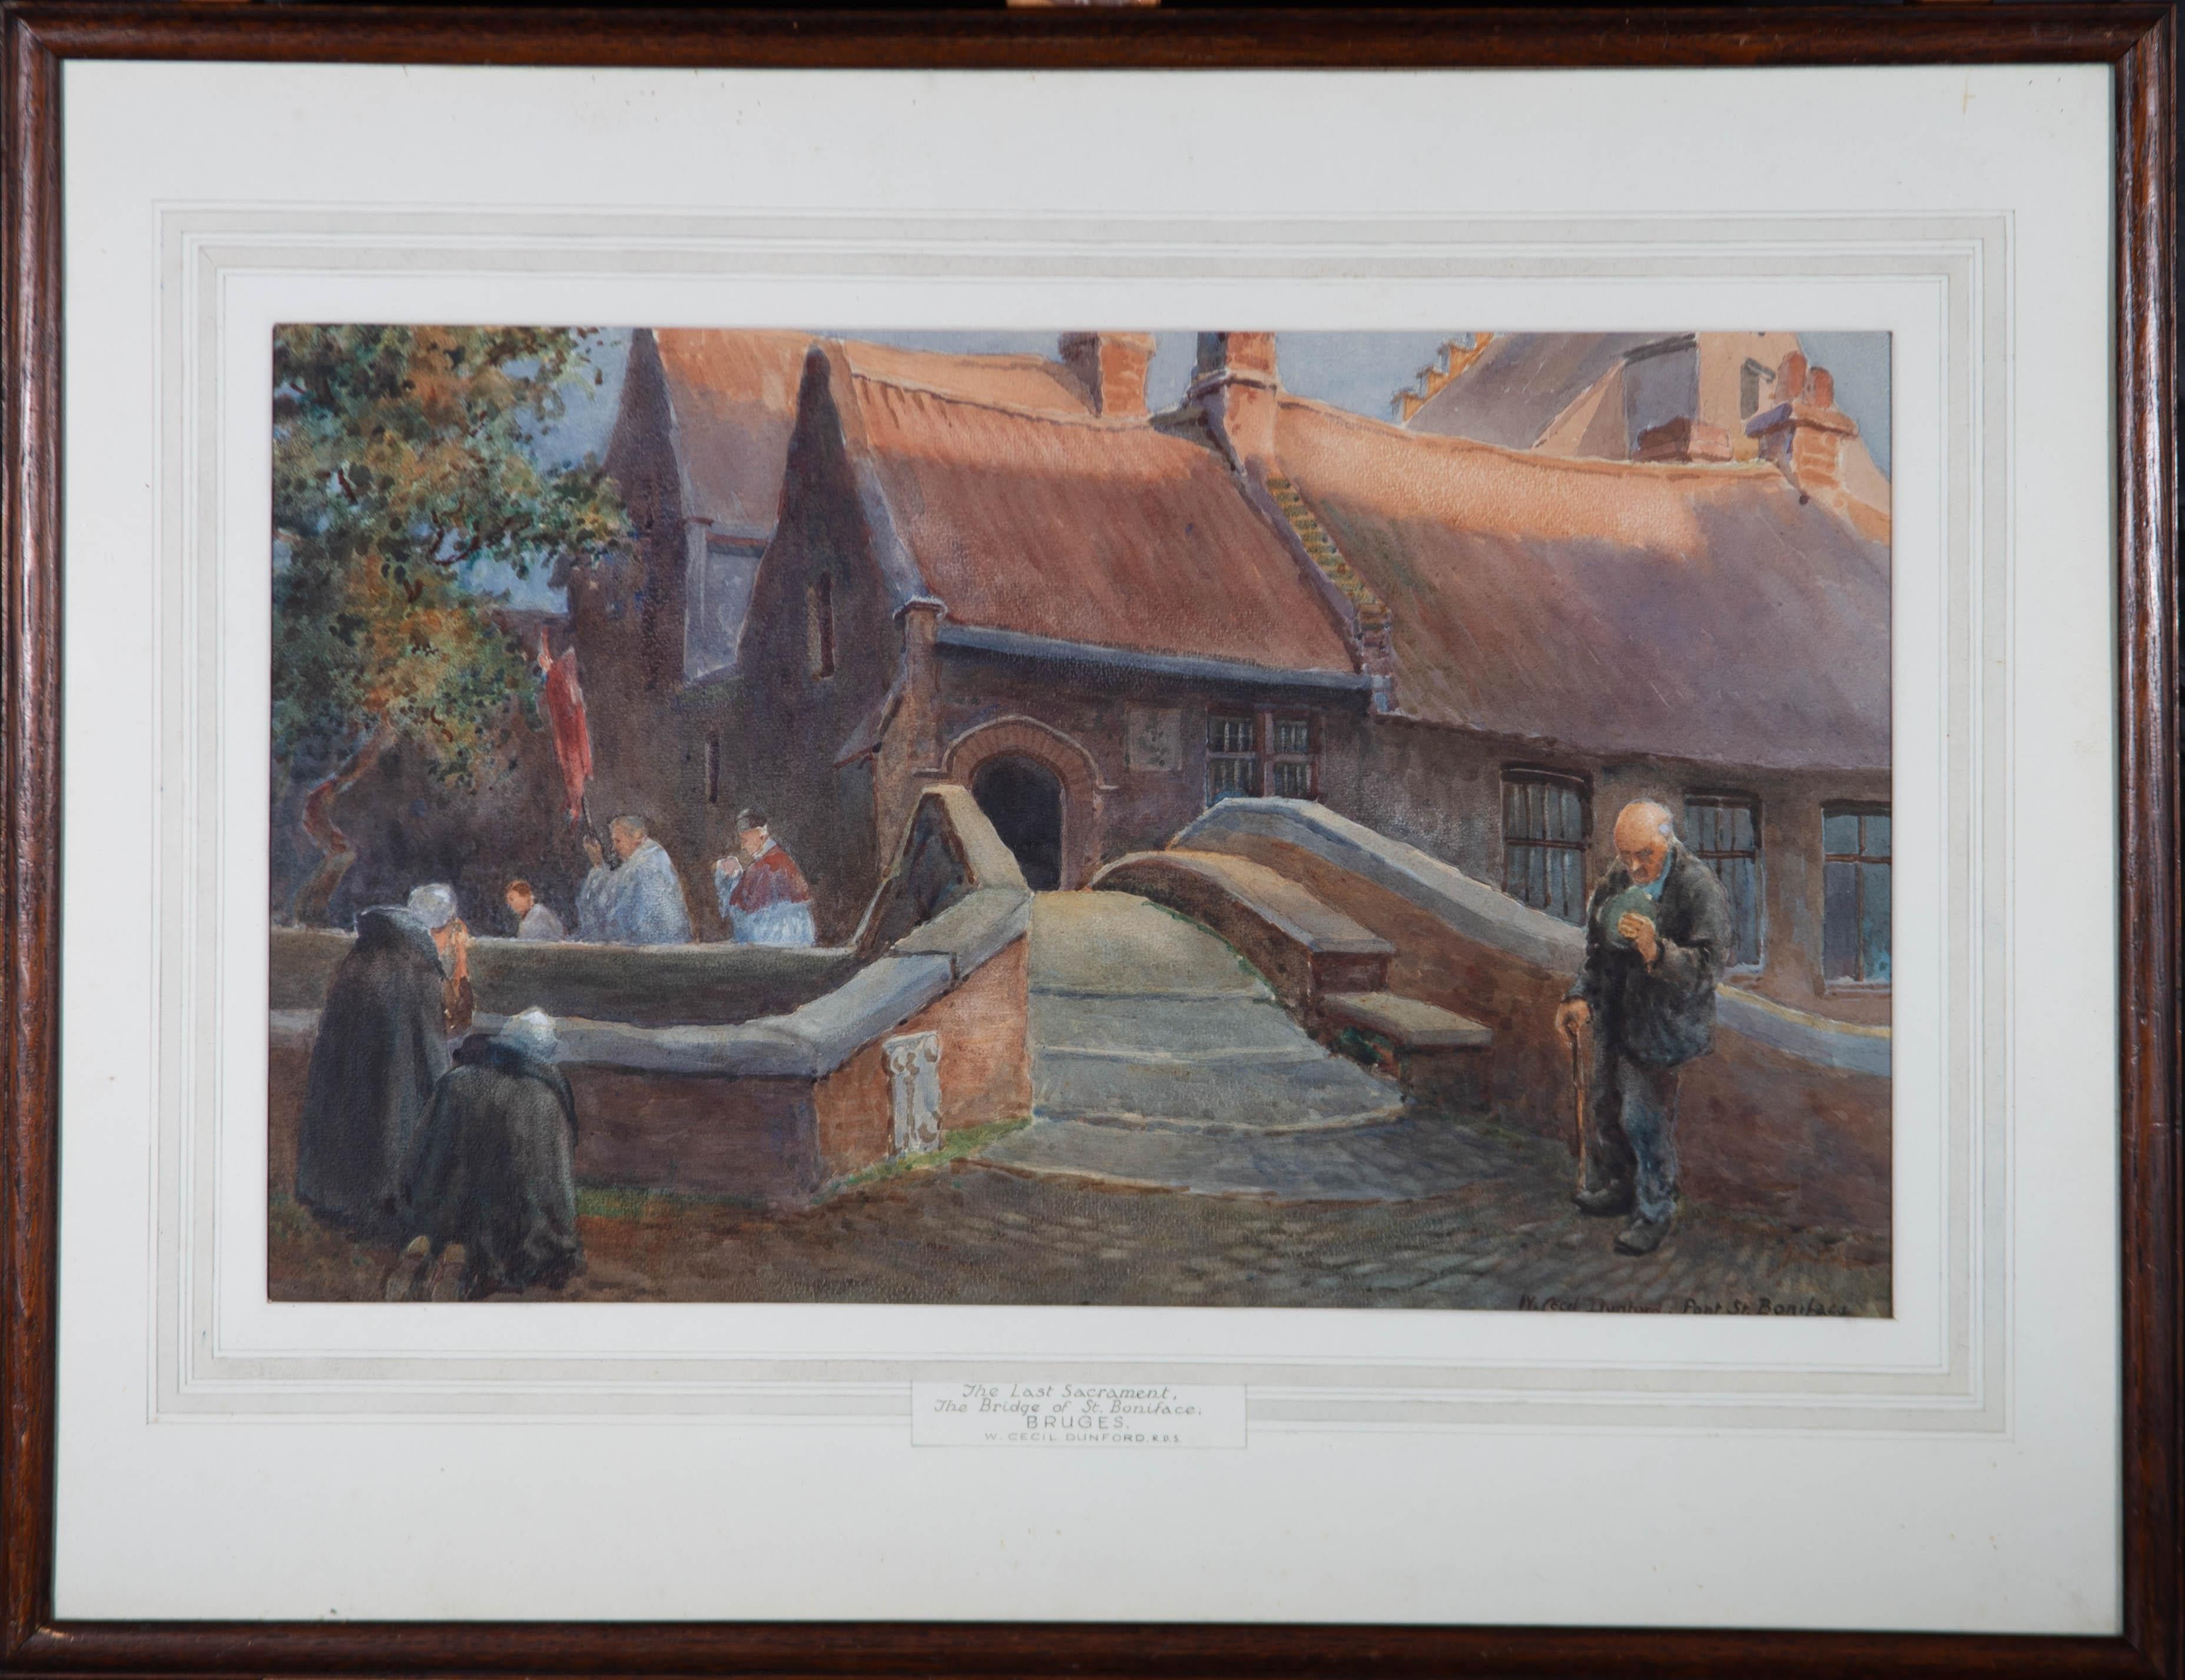 A scene in Bruges, Belgium, by the World War I artist William Cecil Dunford of the last sacrament at the Bridge of St Boniface. Presented glazed in a white wash line mount and thin wooden frame. Signed and inscribed with the location to the